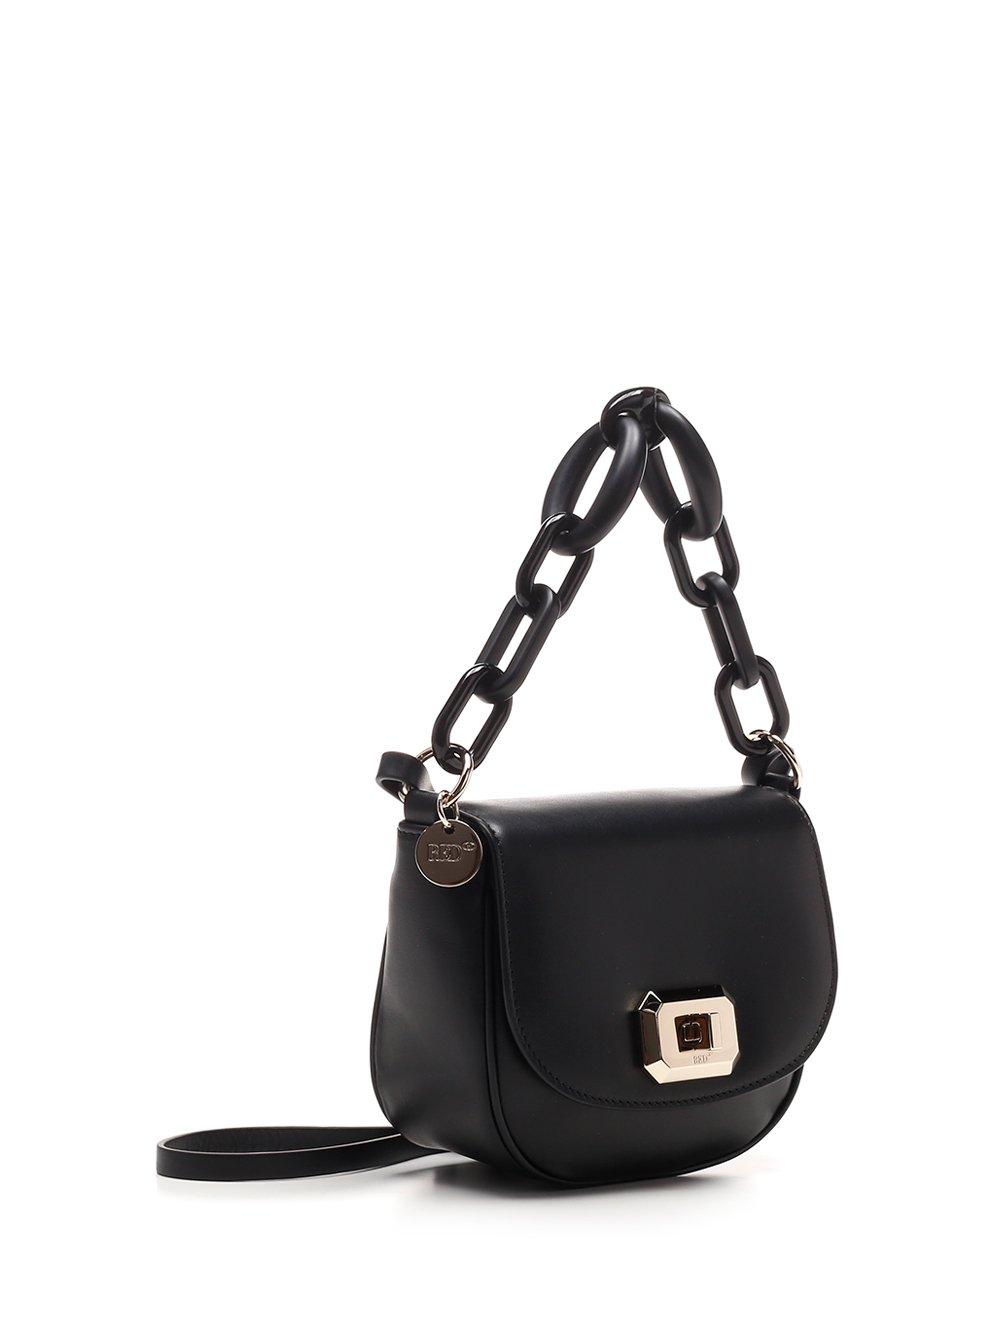 RED Valentino Leather Redvalentino Chain Detailed Crossbody Bag in ...